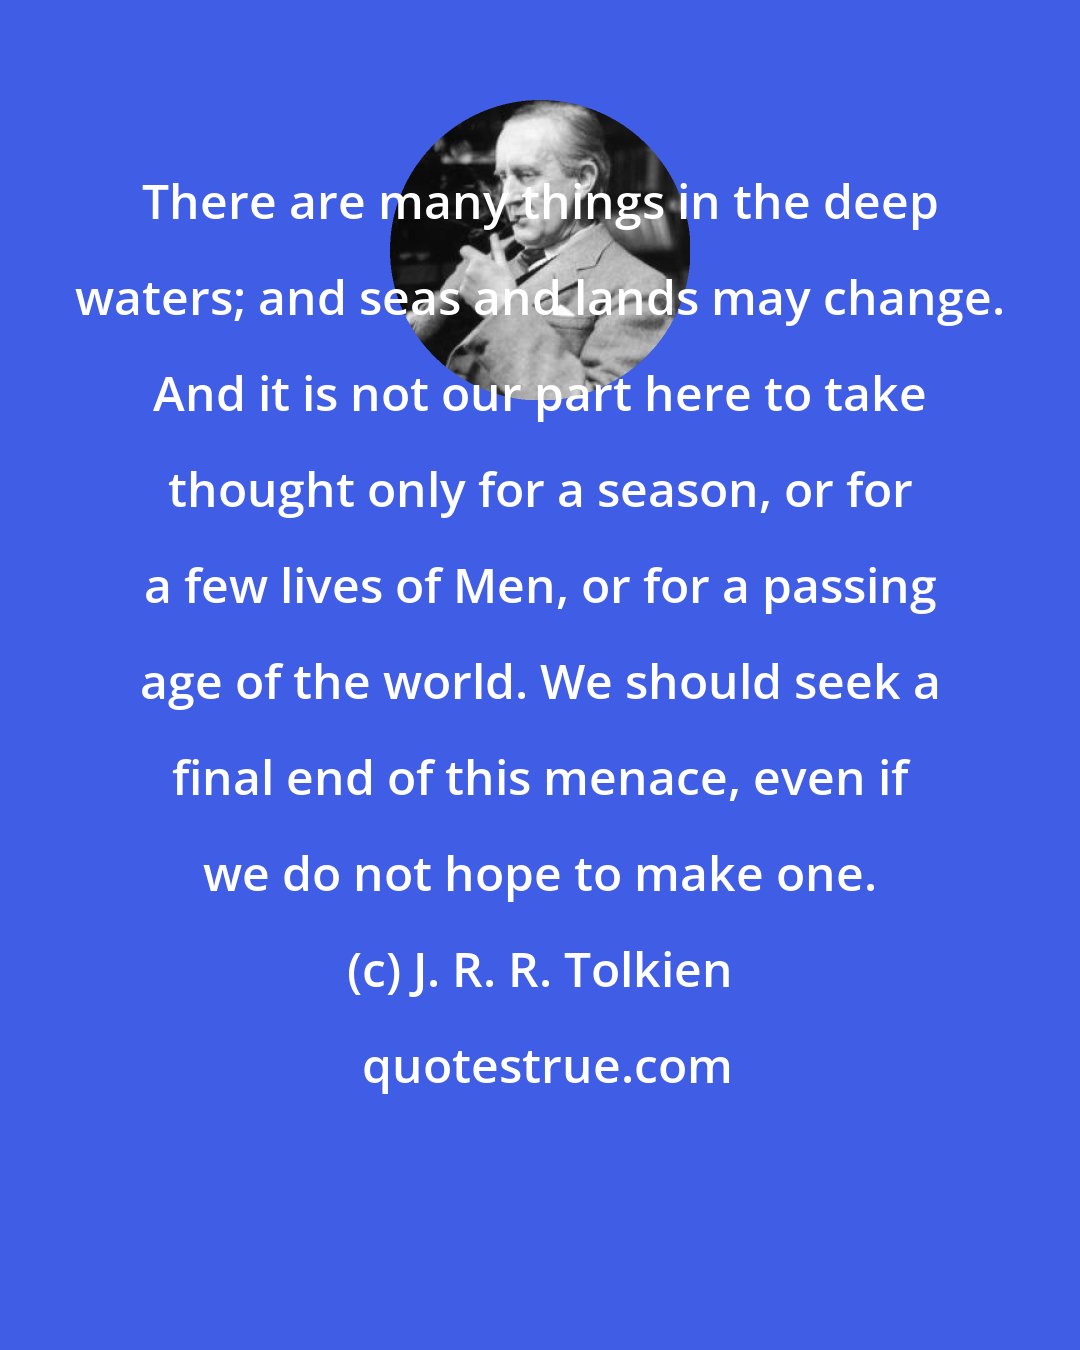 J. R. R. Tolkien: There are many things in the deep waters; and seas and lands may change. And it is not our part here to take thought only for a season, or for a few lives of Men, or for a passing age of the world. We should seek a final end of this menace, even if we do not hope to make one.